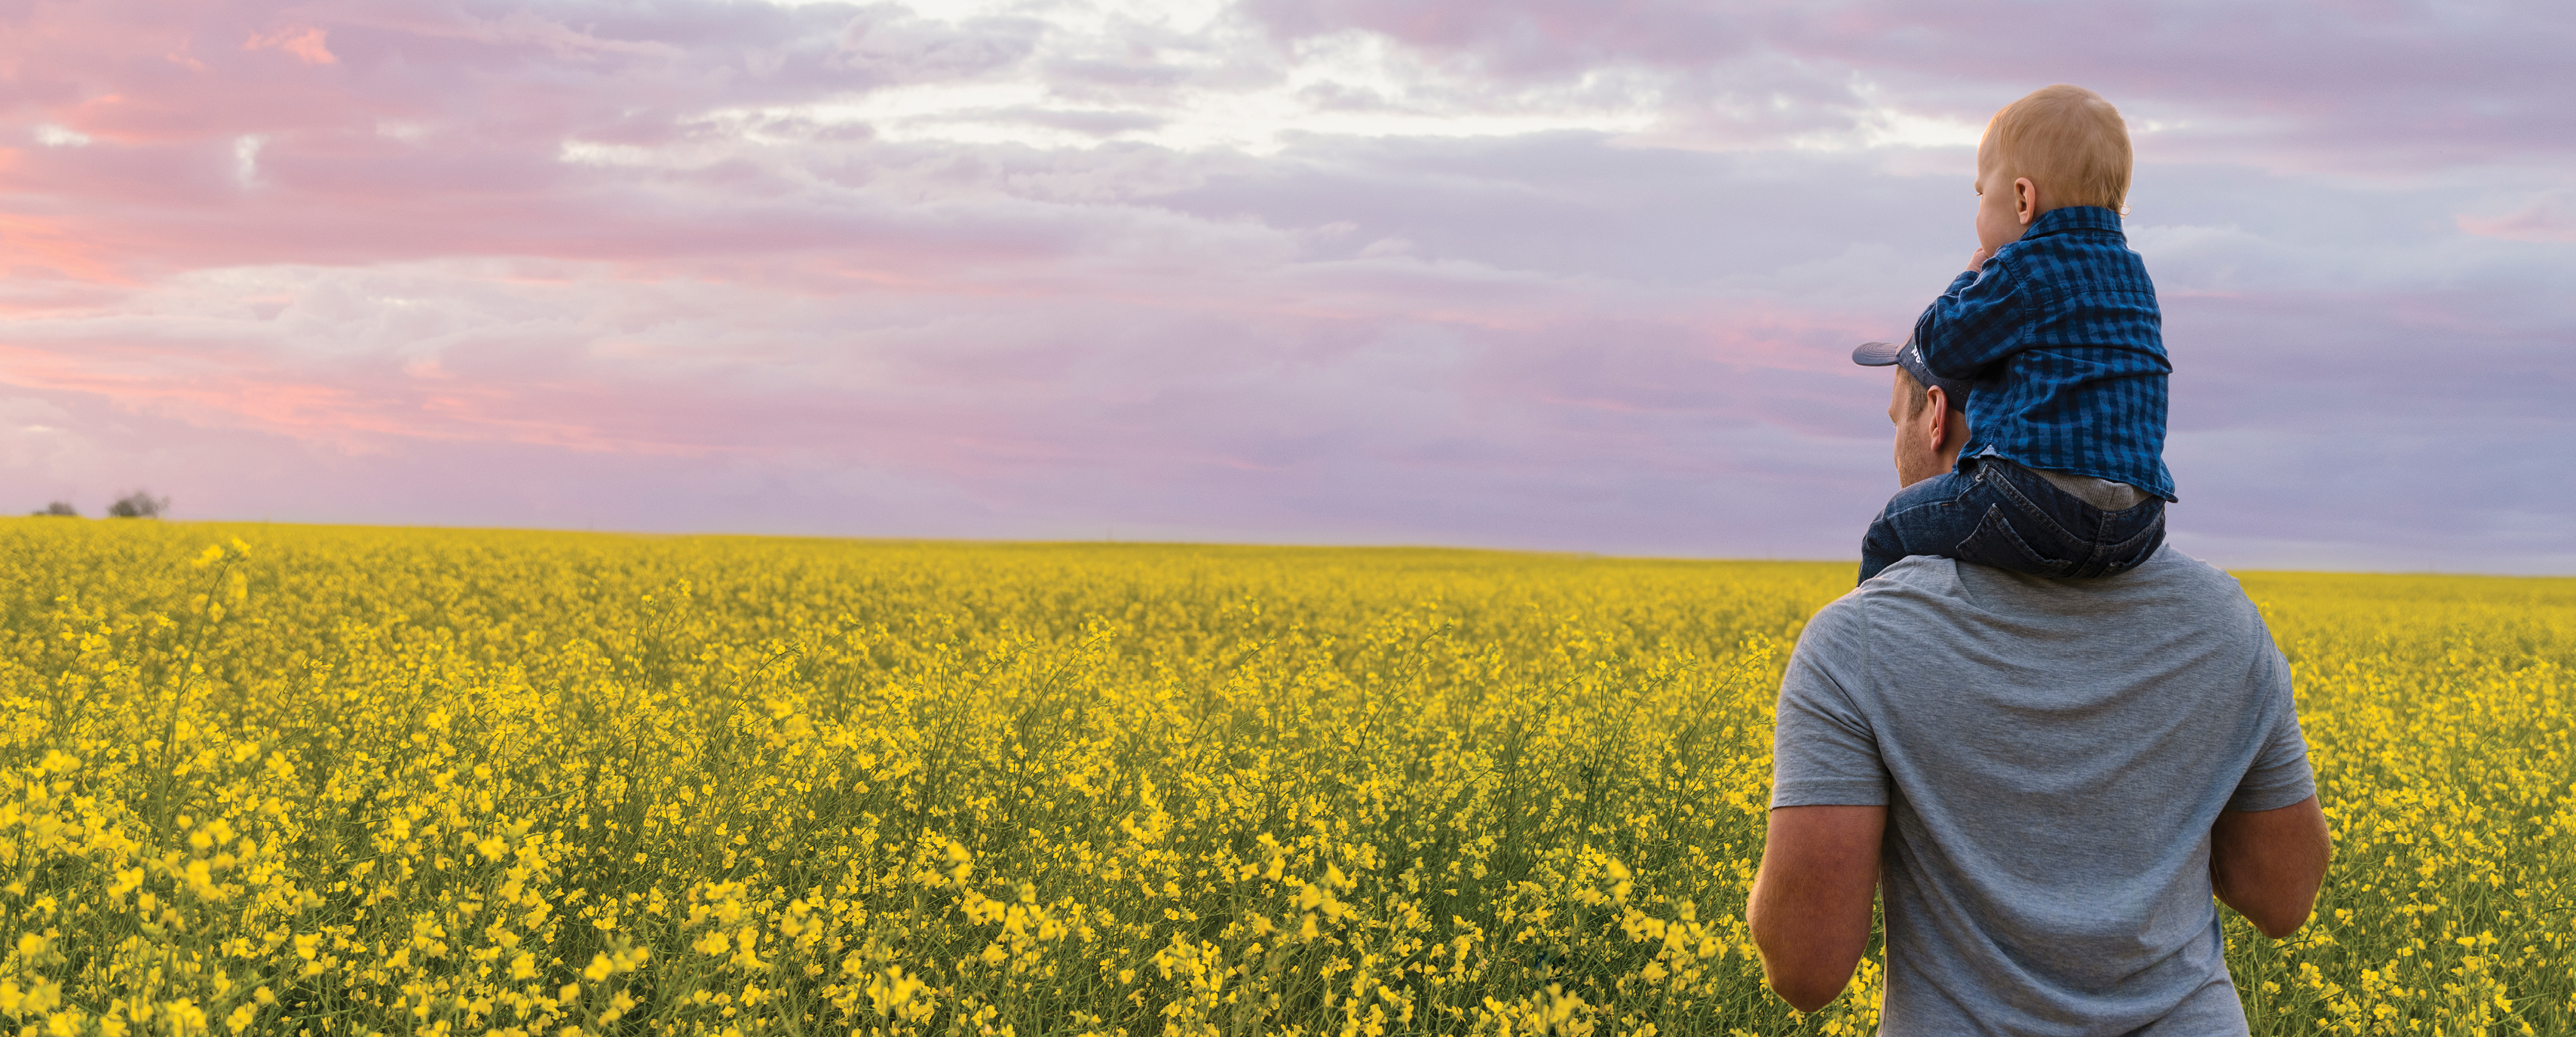 Man carrying child over his shoulders overlooking a canola field